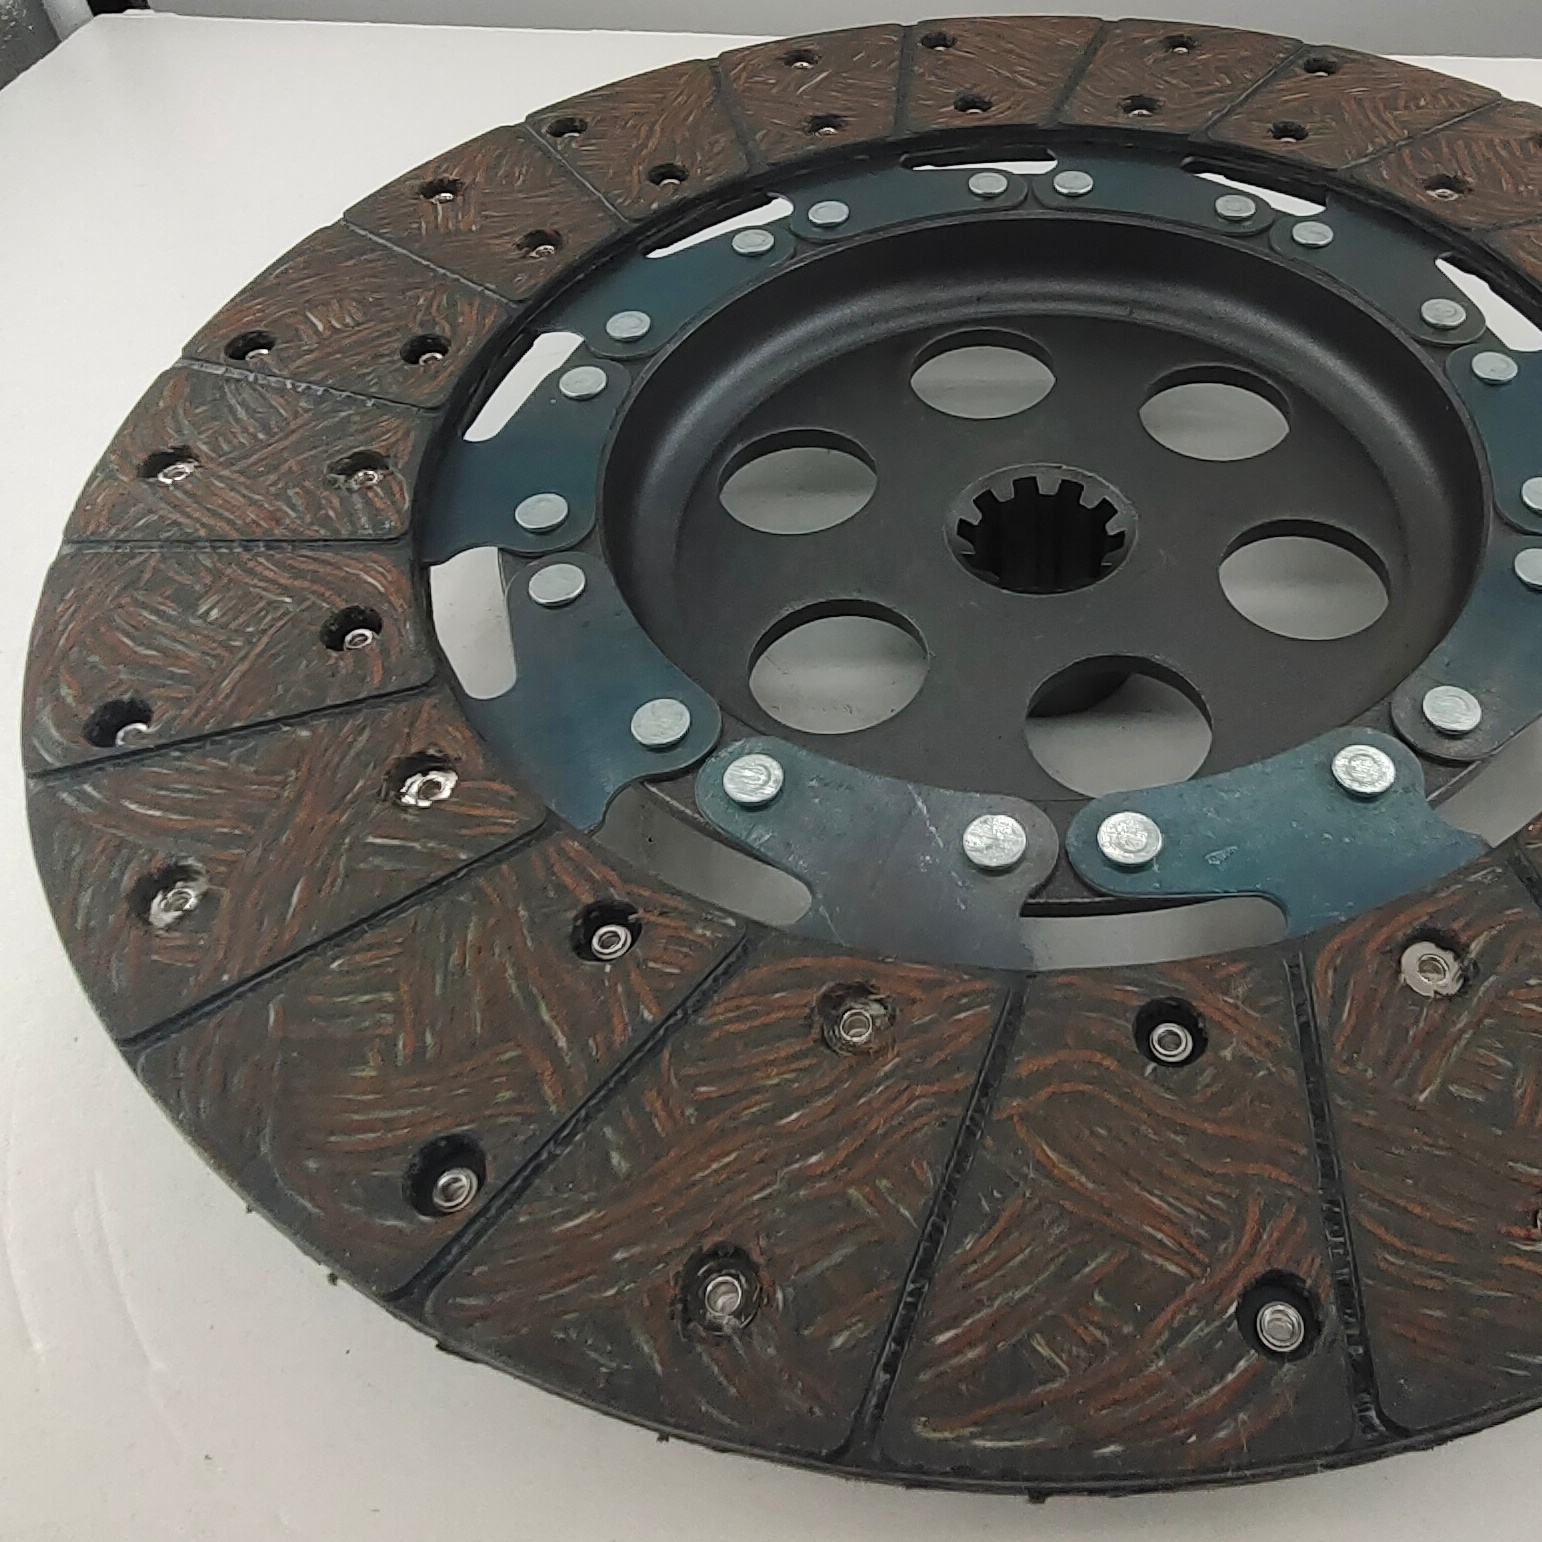 One New Aftermarket Replacement Clutch Disc Fits Massey Ferguson Tractor 592, 595, 298, 698, 698T